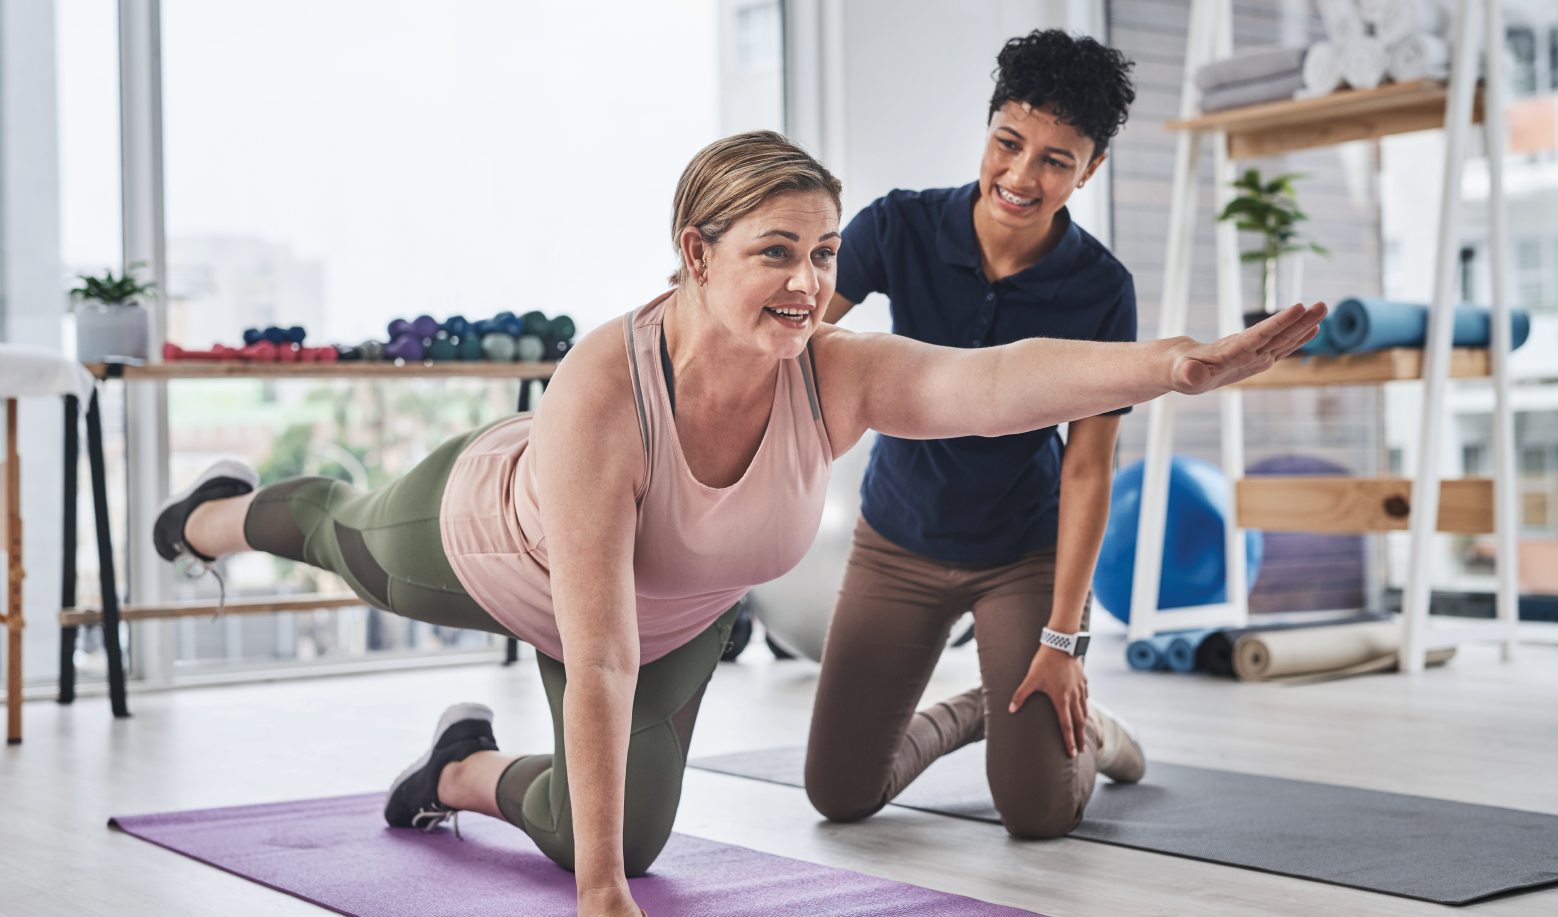 Yoga Therapist vs. Yoga Instructor. What's the Difference? - MUIH